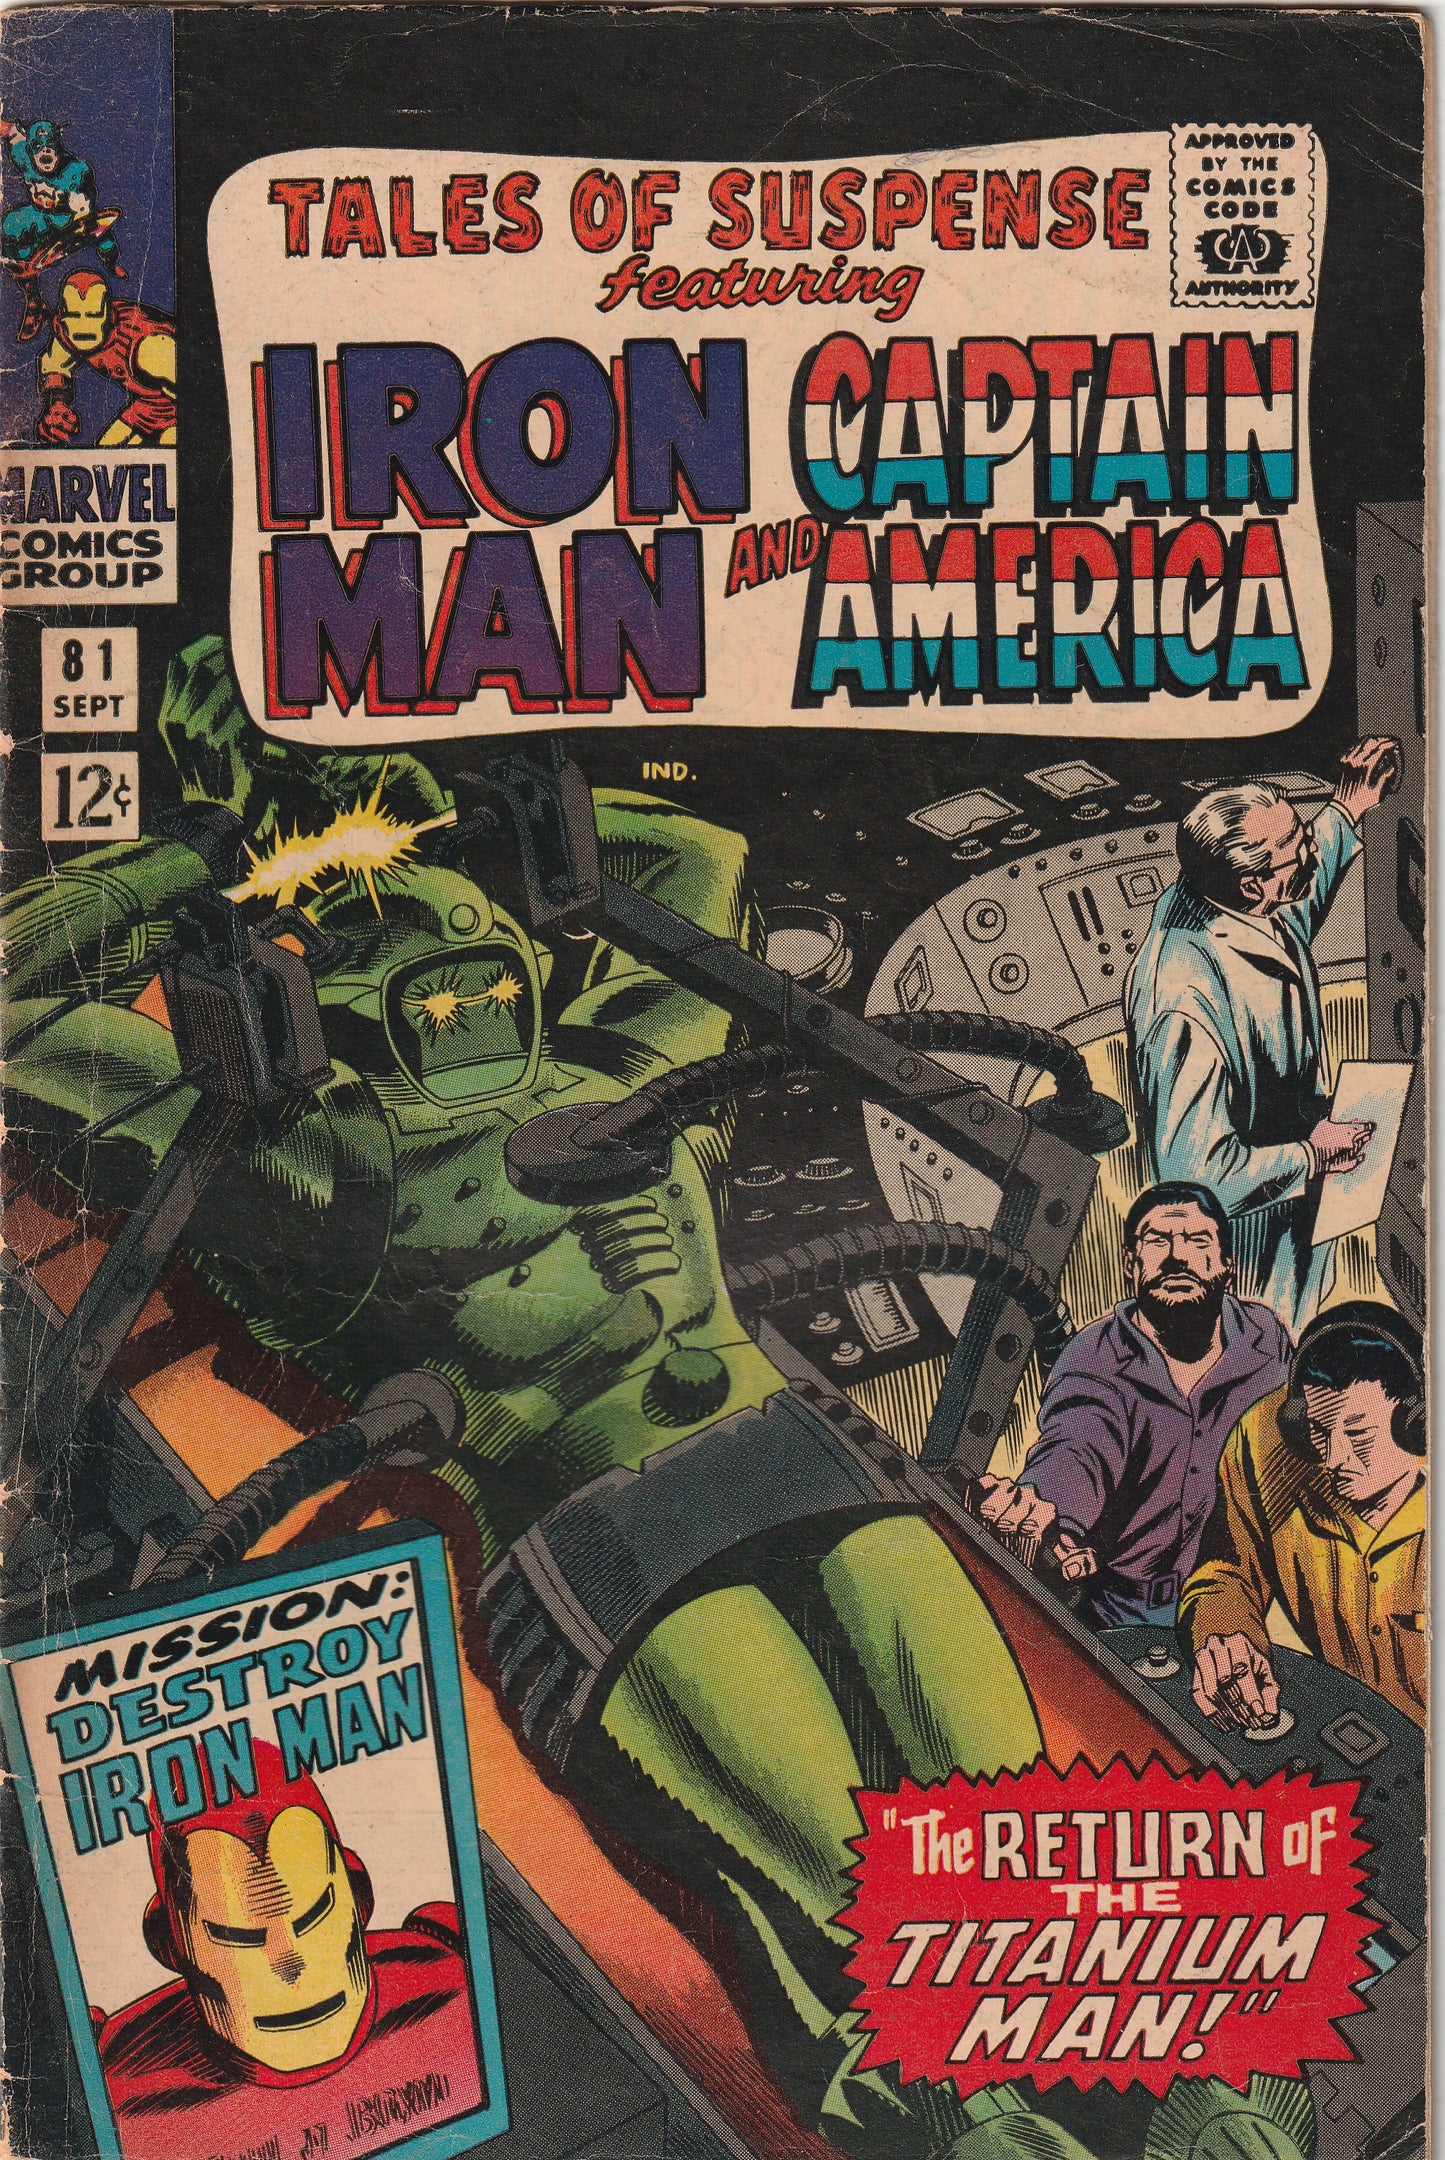 Tales of Suspense #81 (1966) -  Featuring Iron Man and Captain Americ